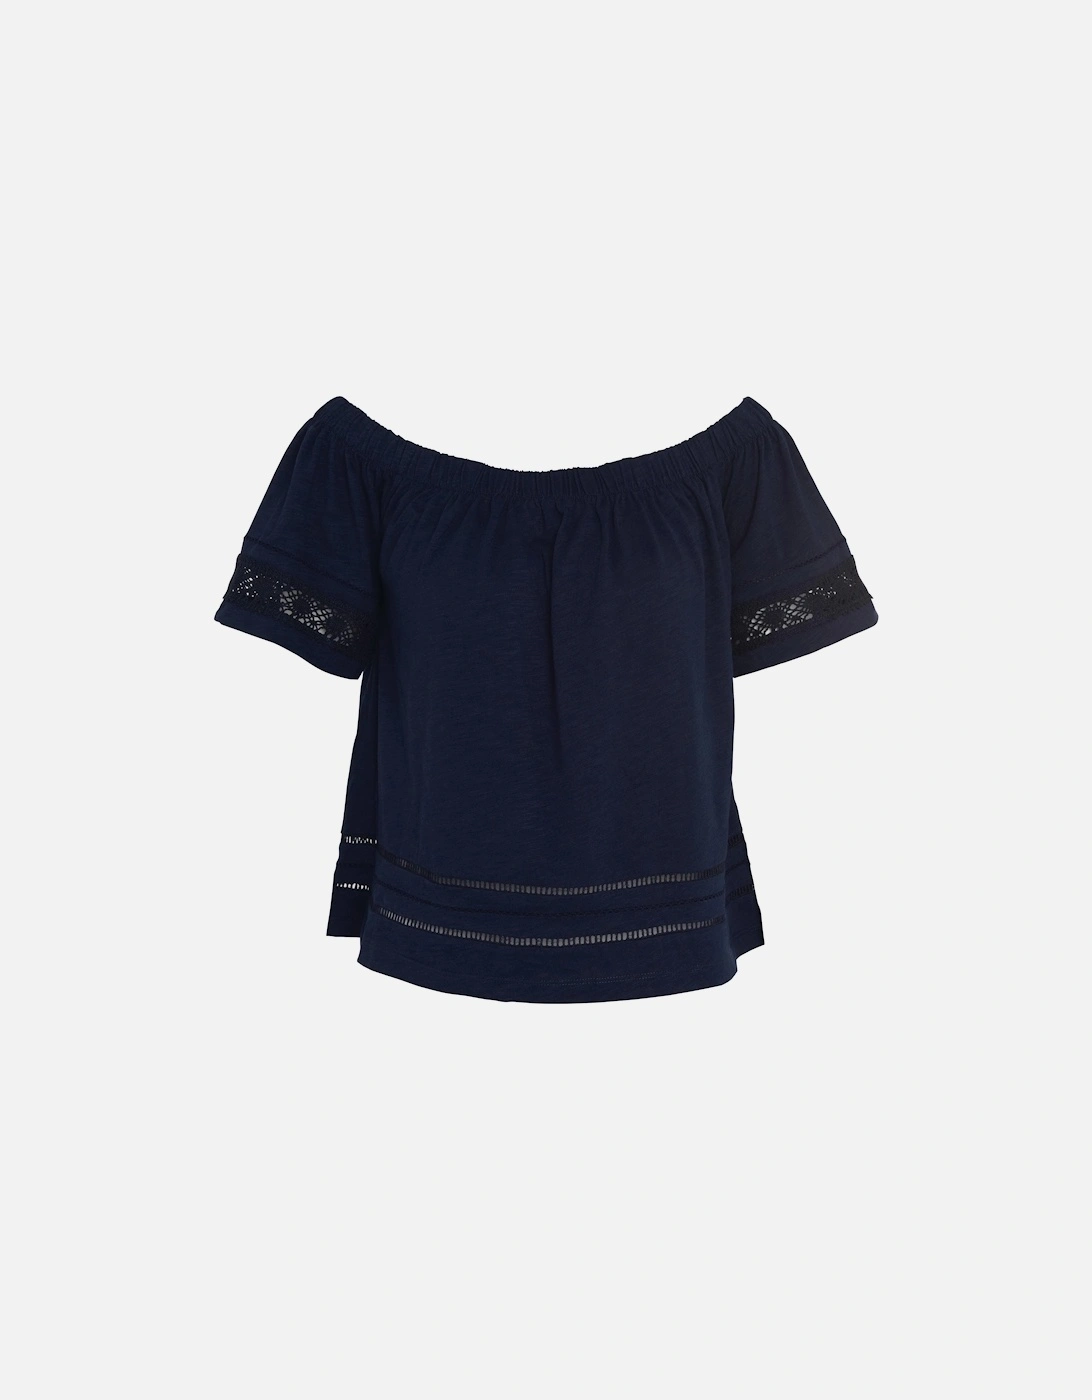 Ralee Womens Relaxed Top